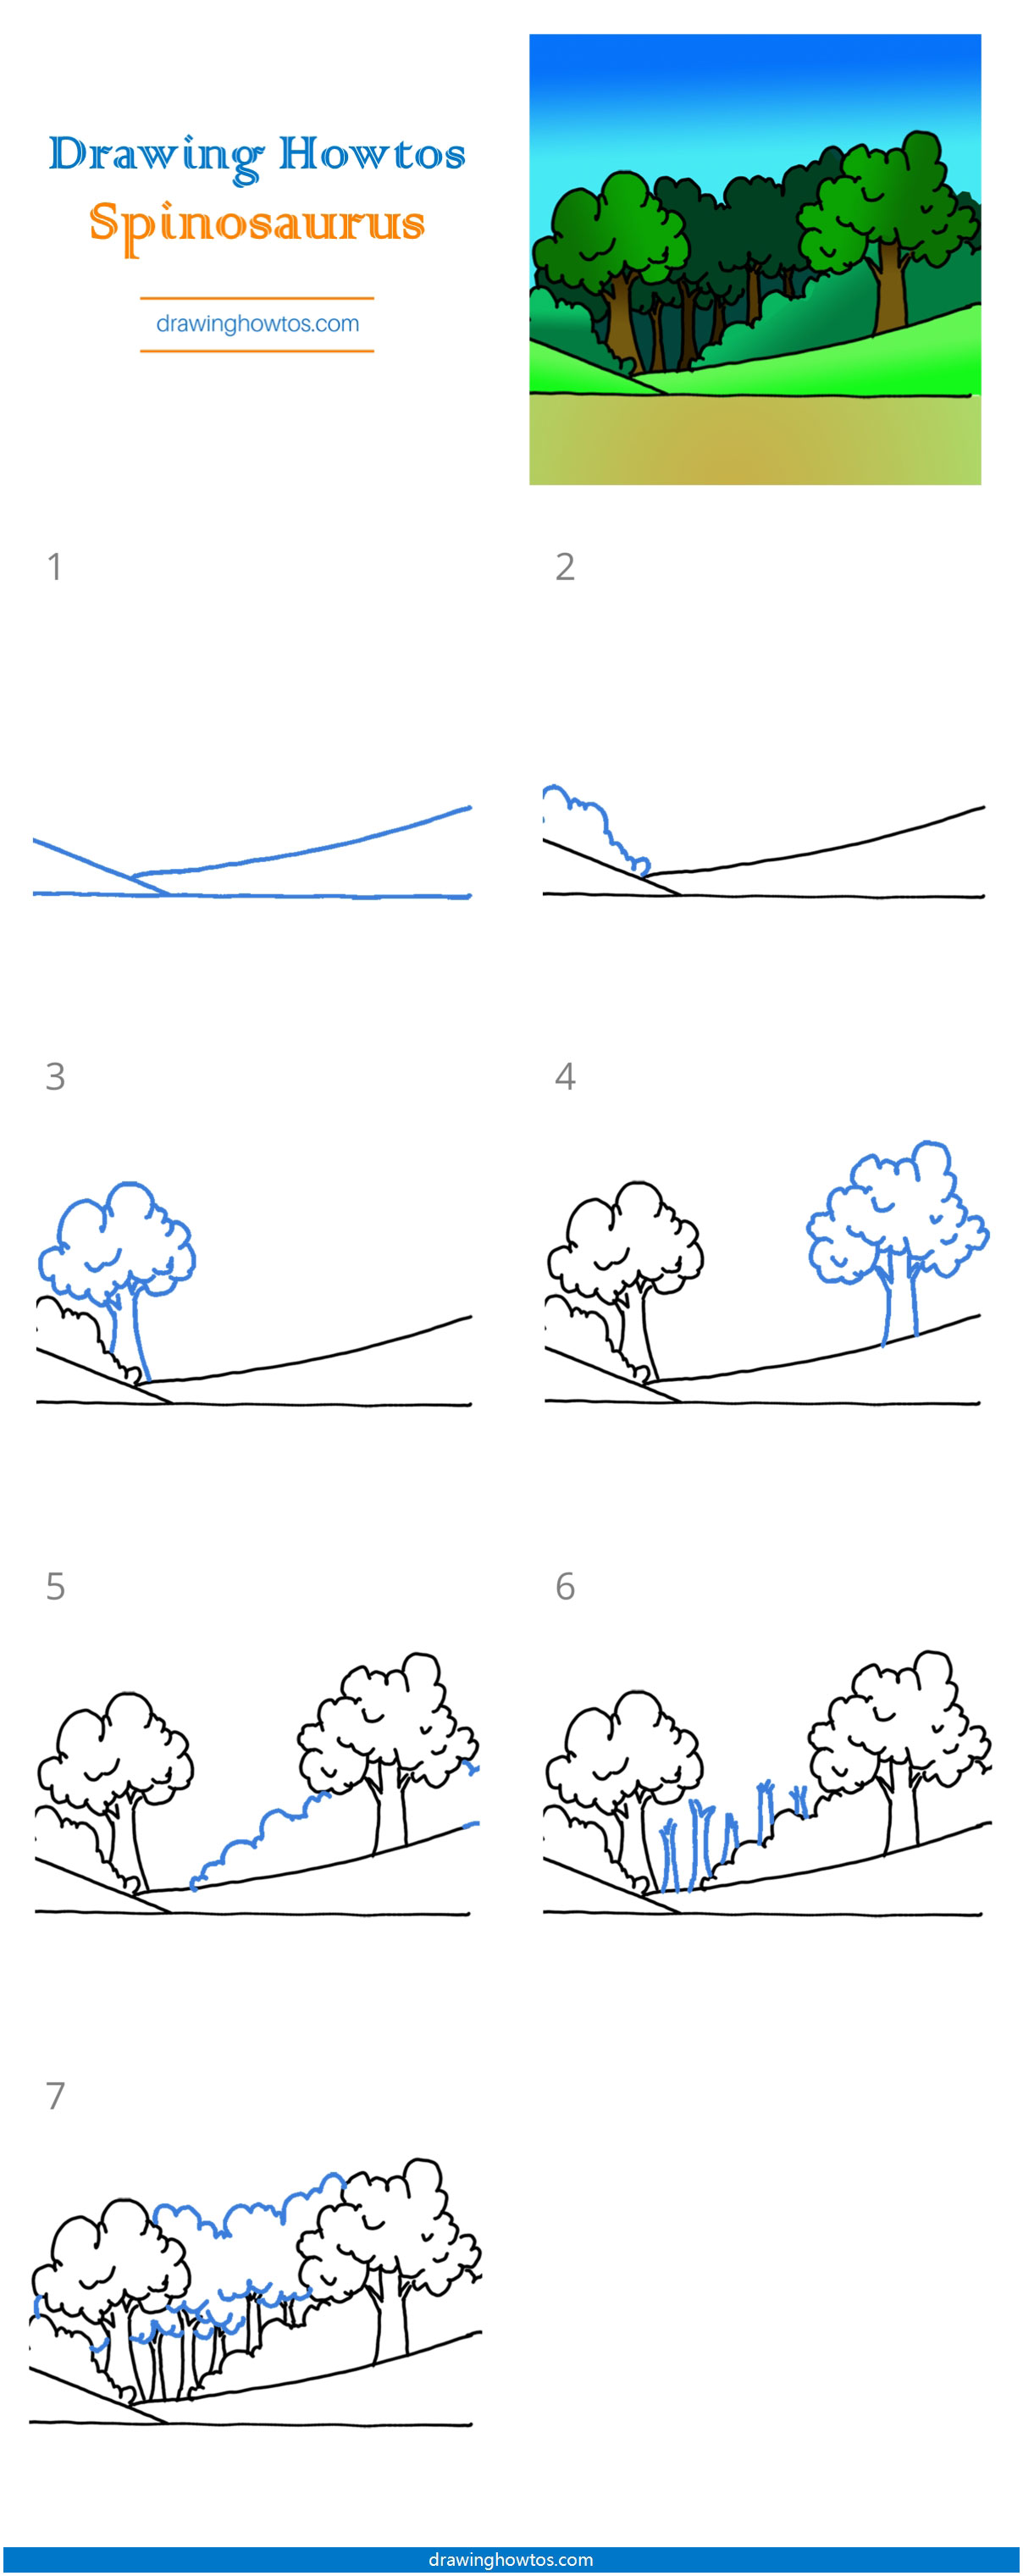 How to Draw a Forest - Step by Step Easy Drawing Guides - Drawing Howtos